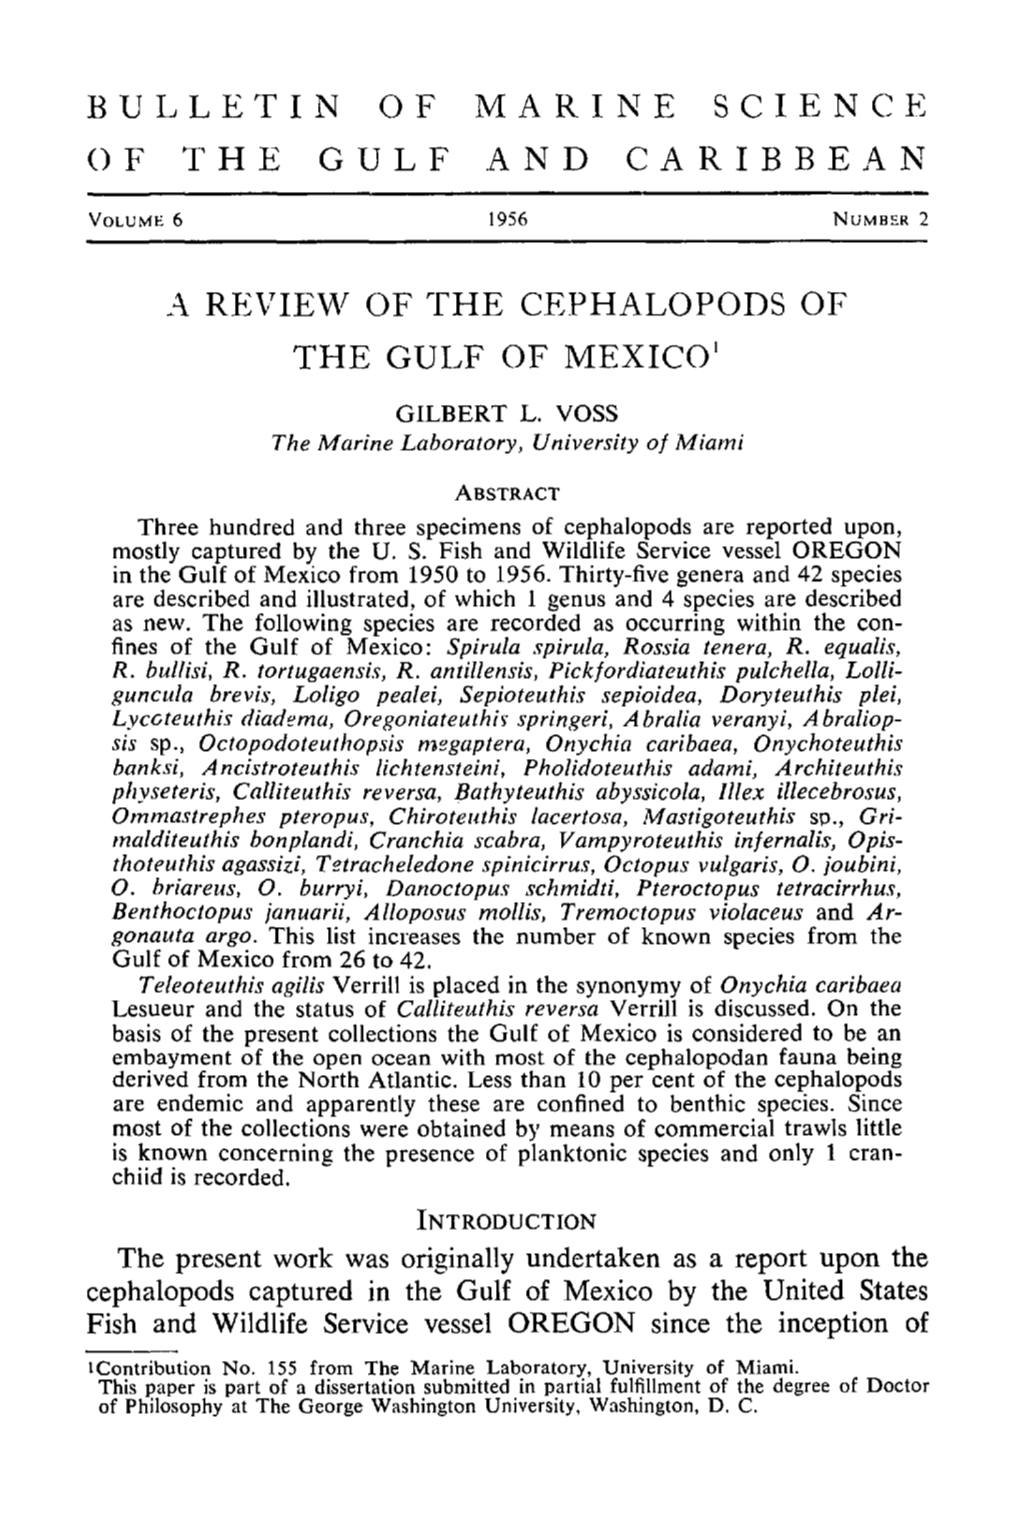 A Review of the Cephalopods of the Gulf of Mexico